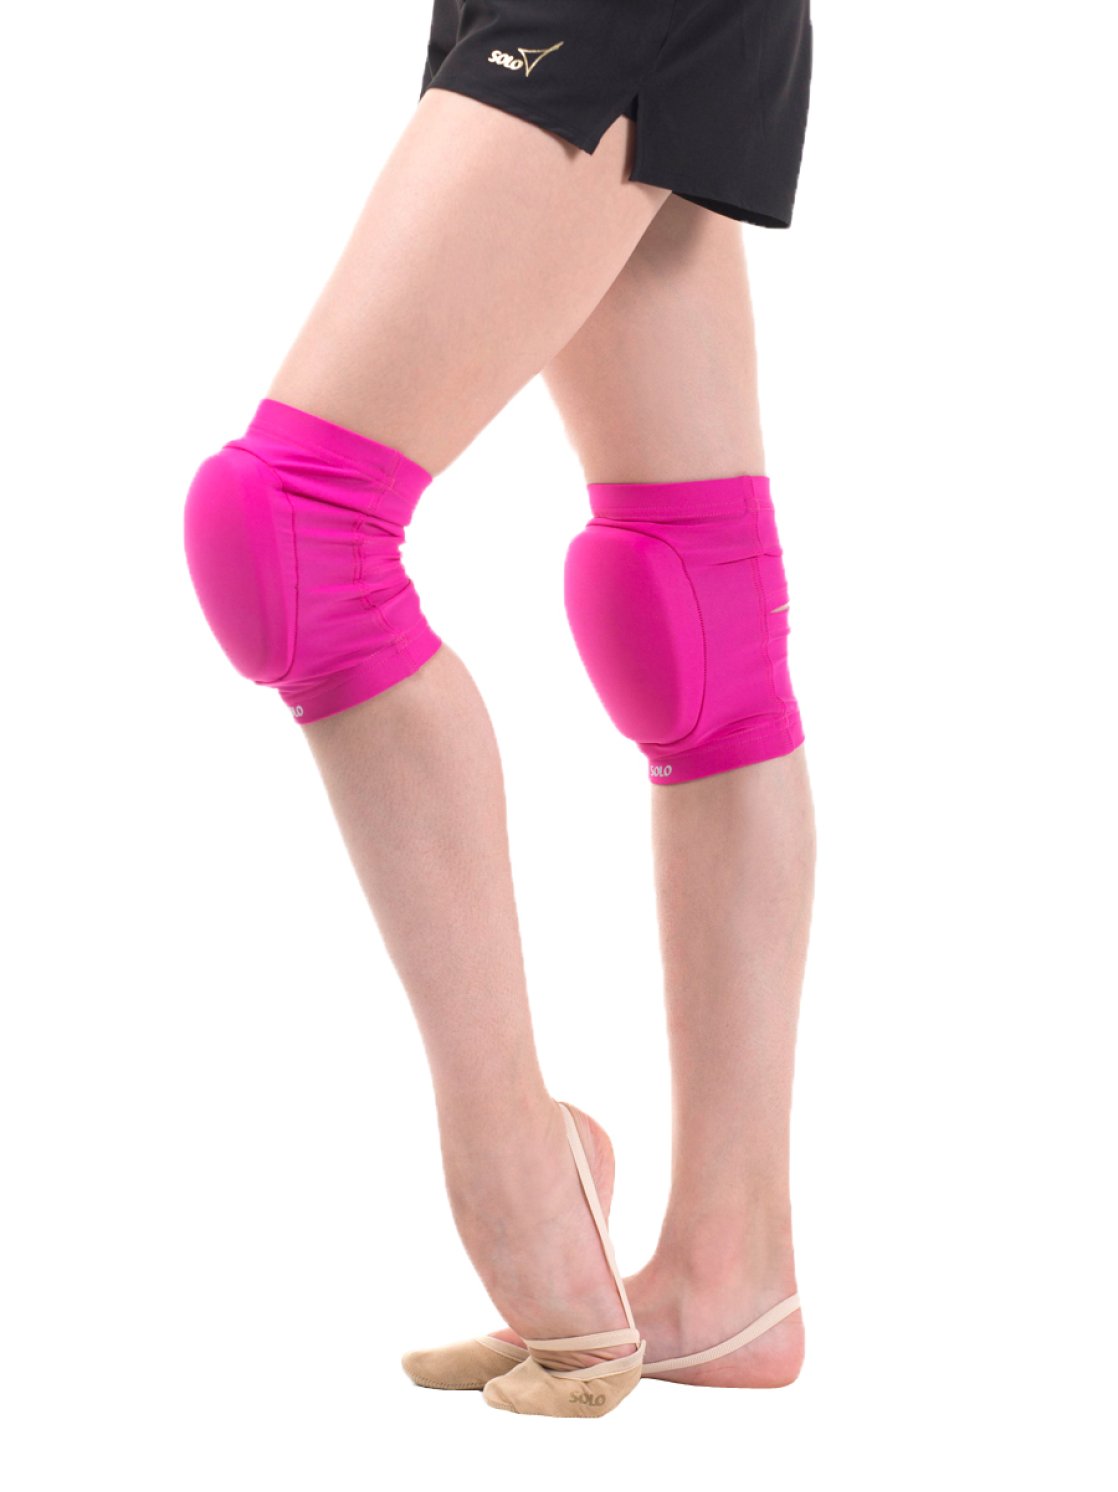 Molded knee pads